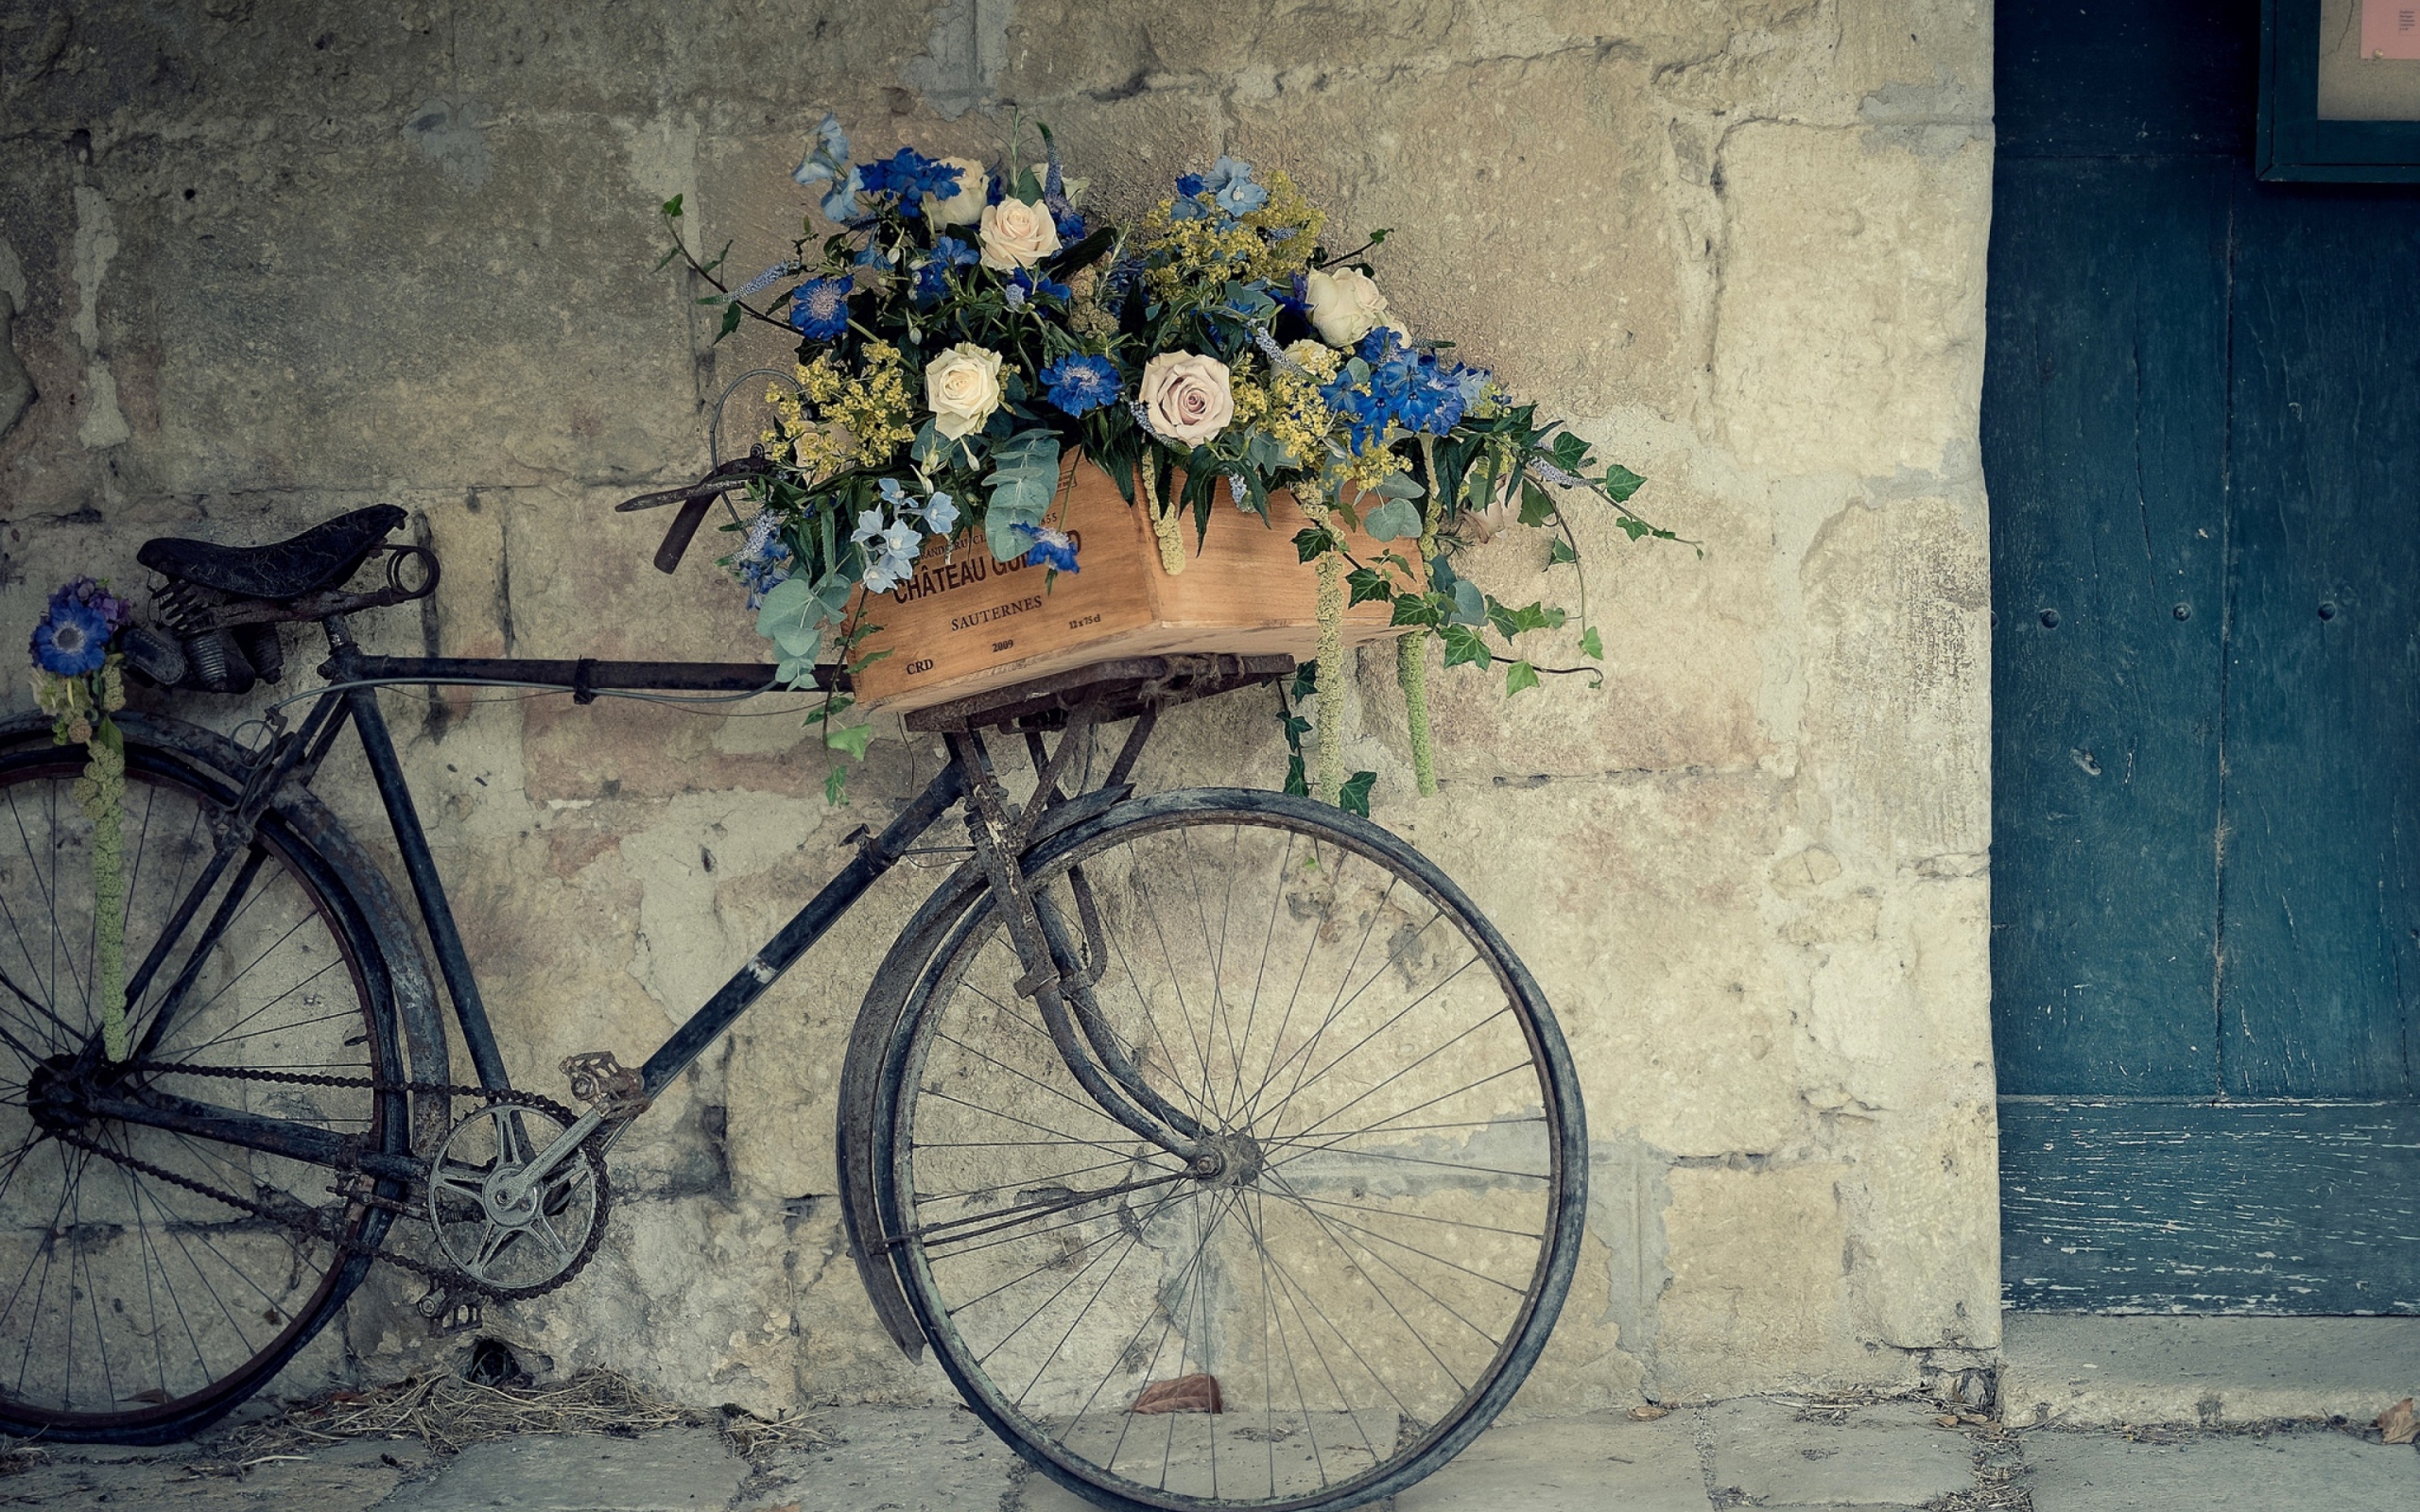 Sfondi Bicycle With Basket Full Of Flowers 2560x1600